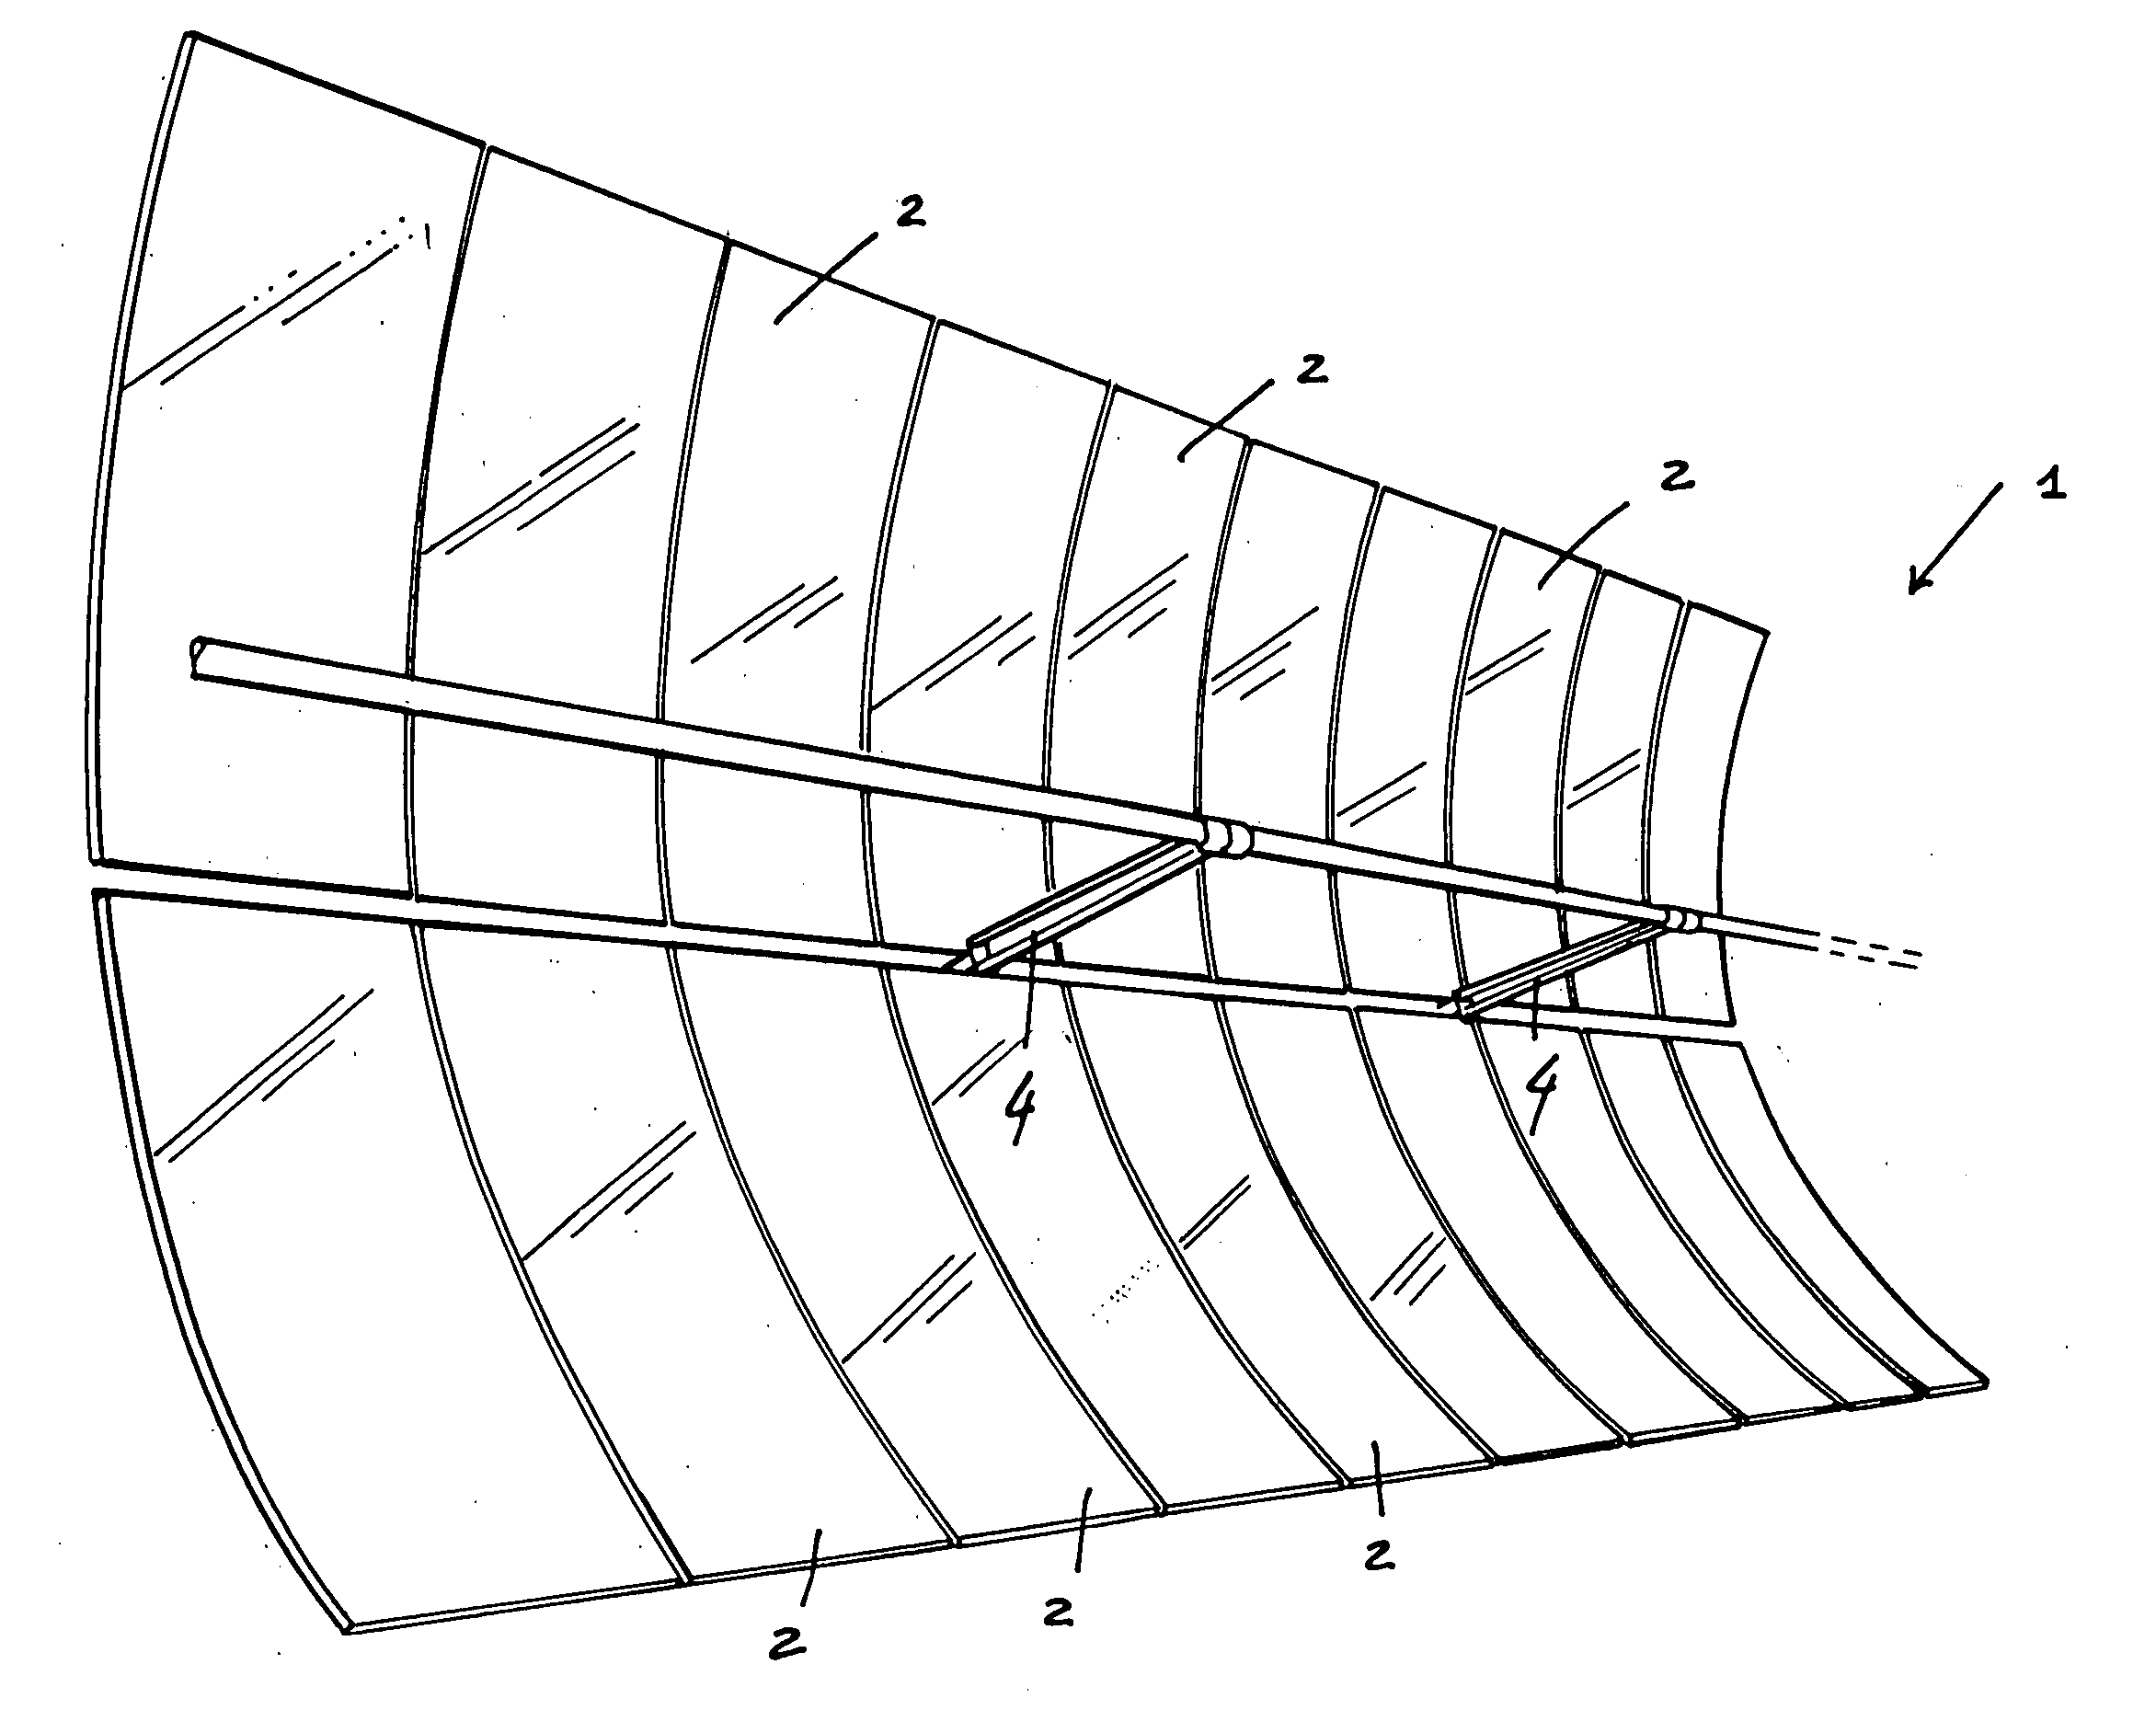 Reflecting parabolic construction for solar heating systems